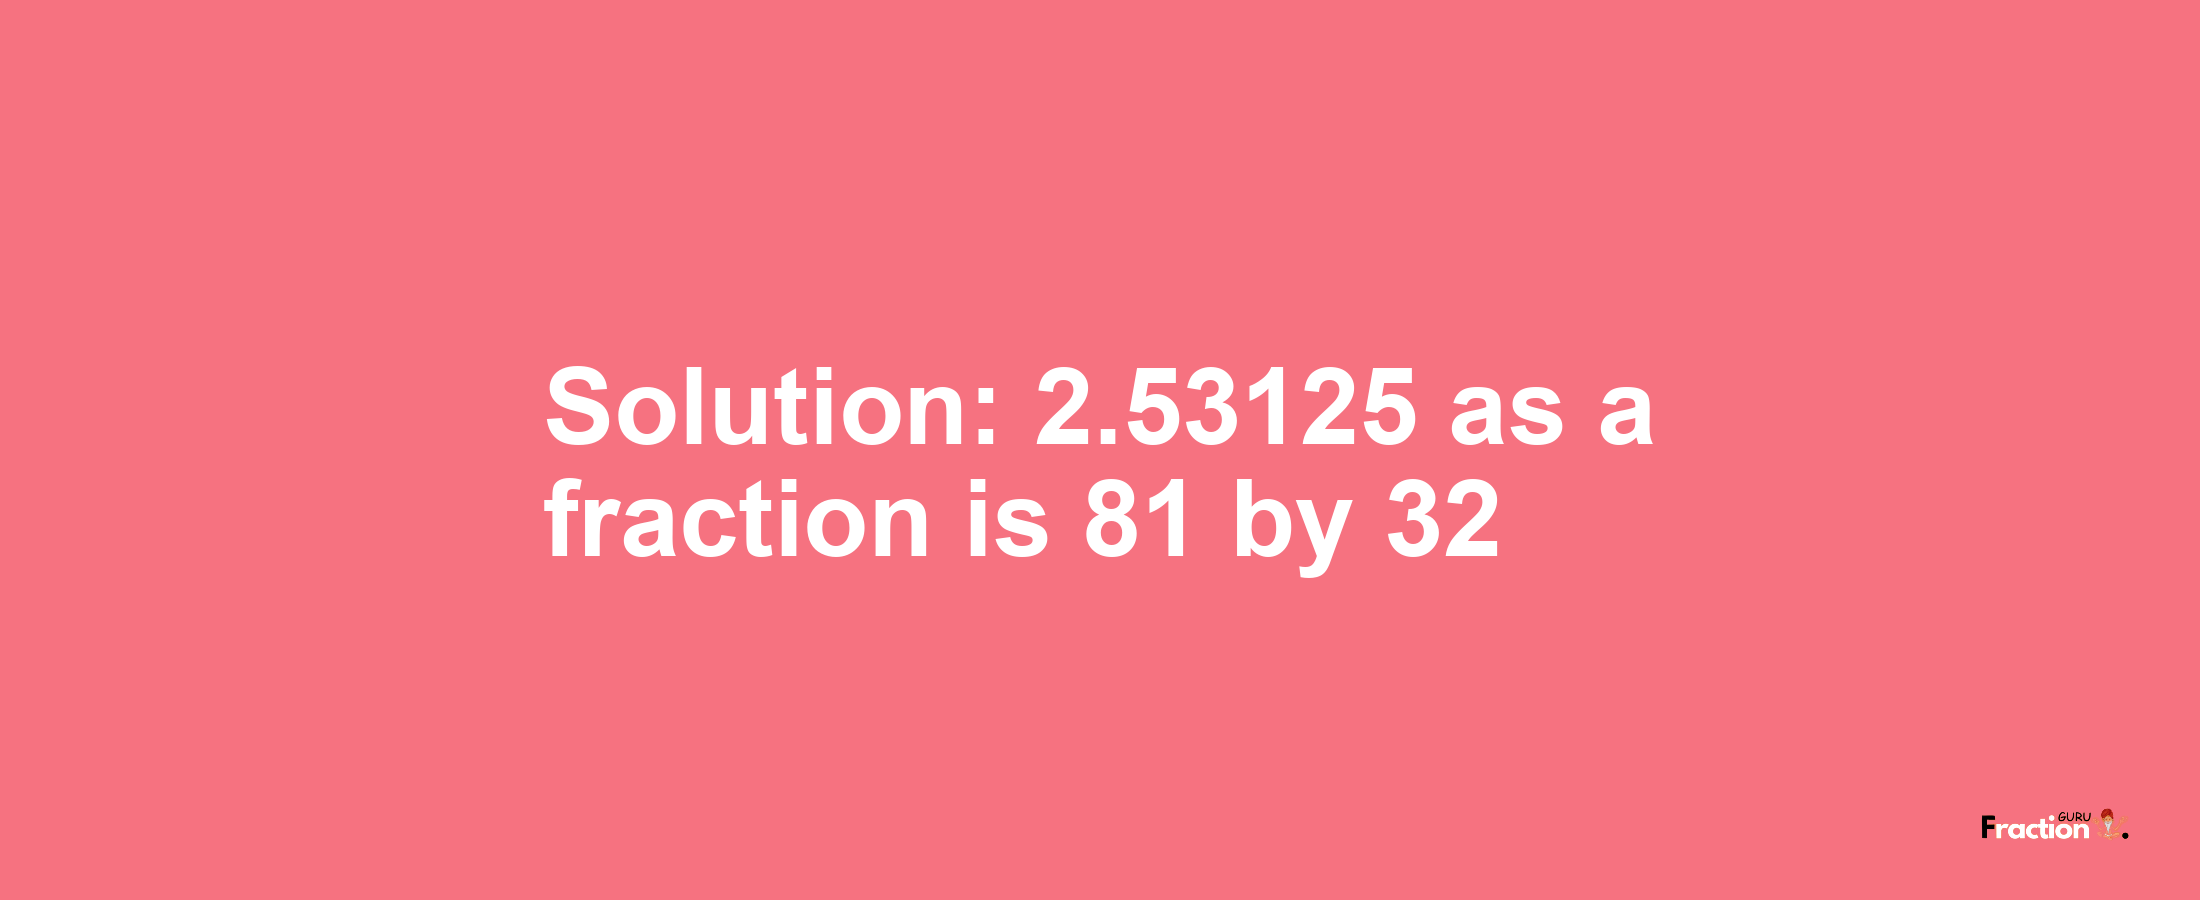 Solution:2.53125 as a fraction is 81/32